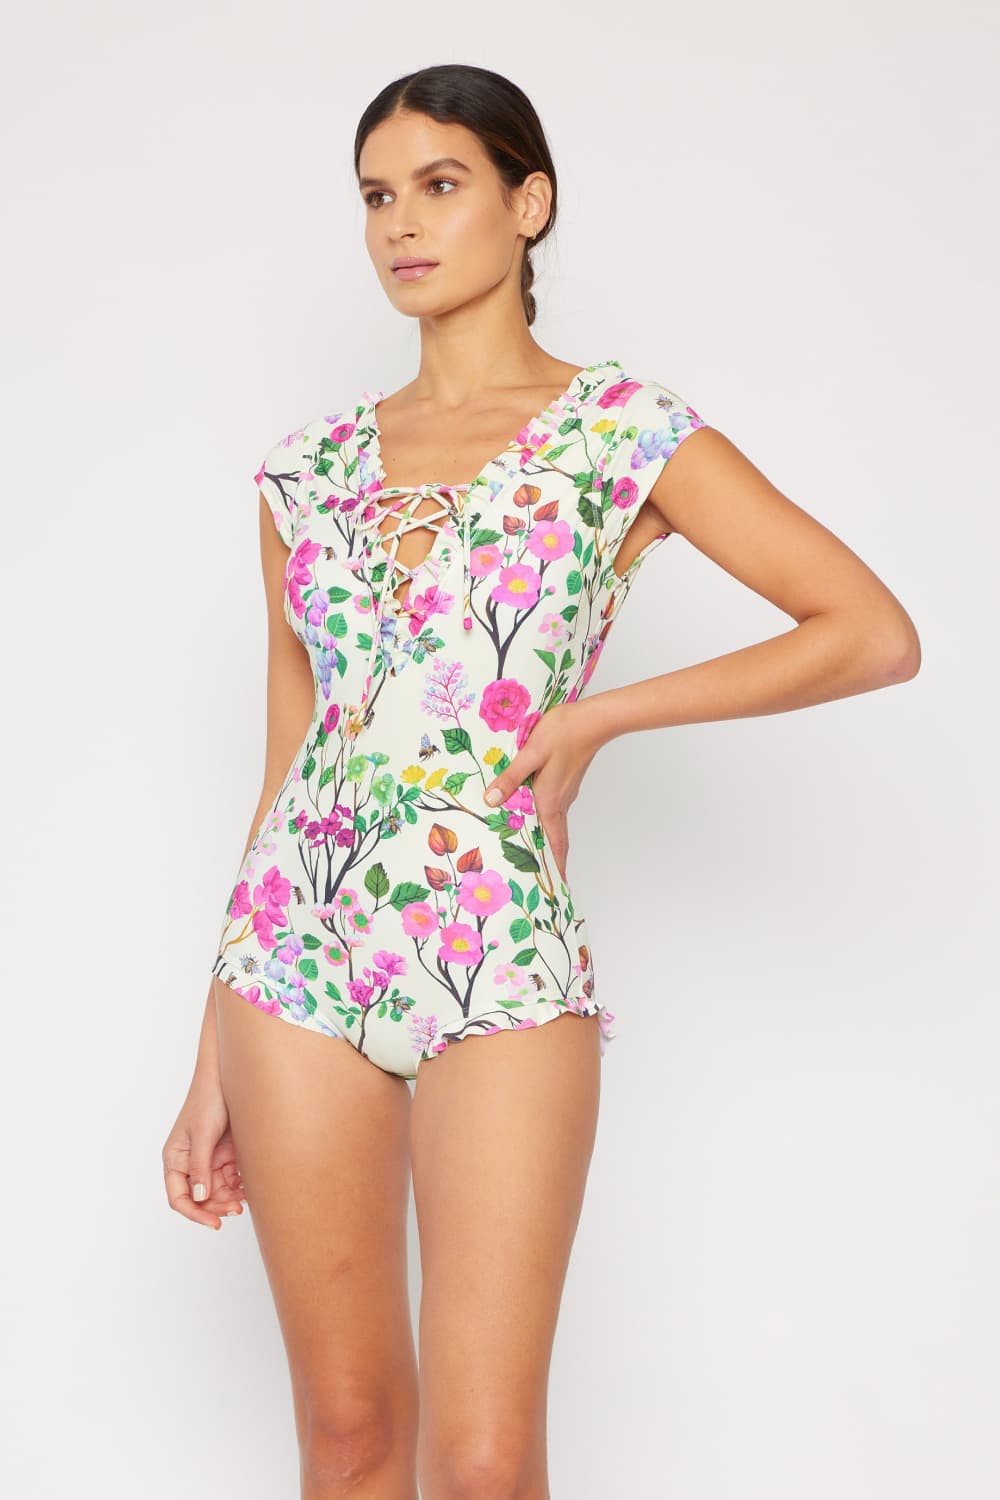 Bring Me Flowers V-Neck One Piece Swimsuit Cherry Blossom Cream - Women’s Clothing & Accessories - Swimwear - 3 - 2024